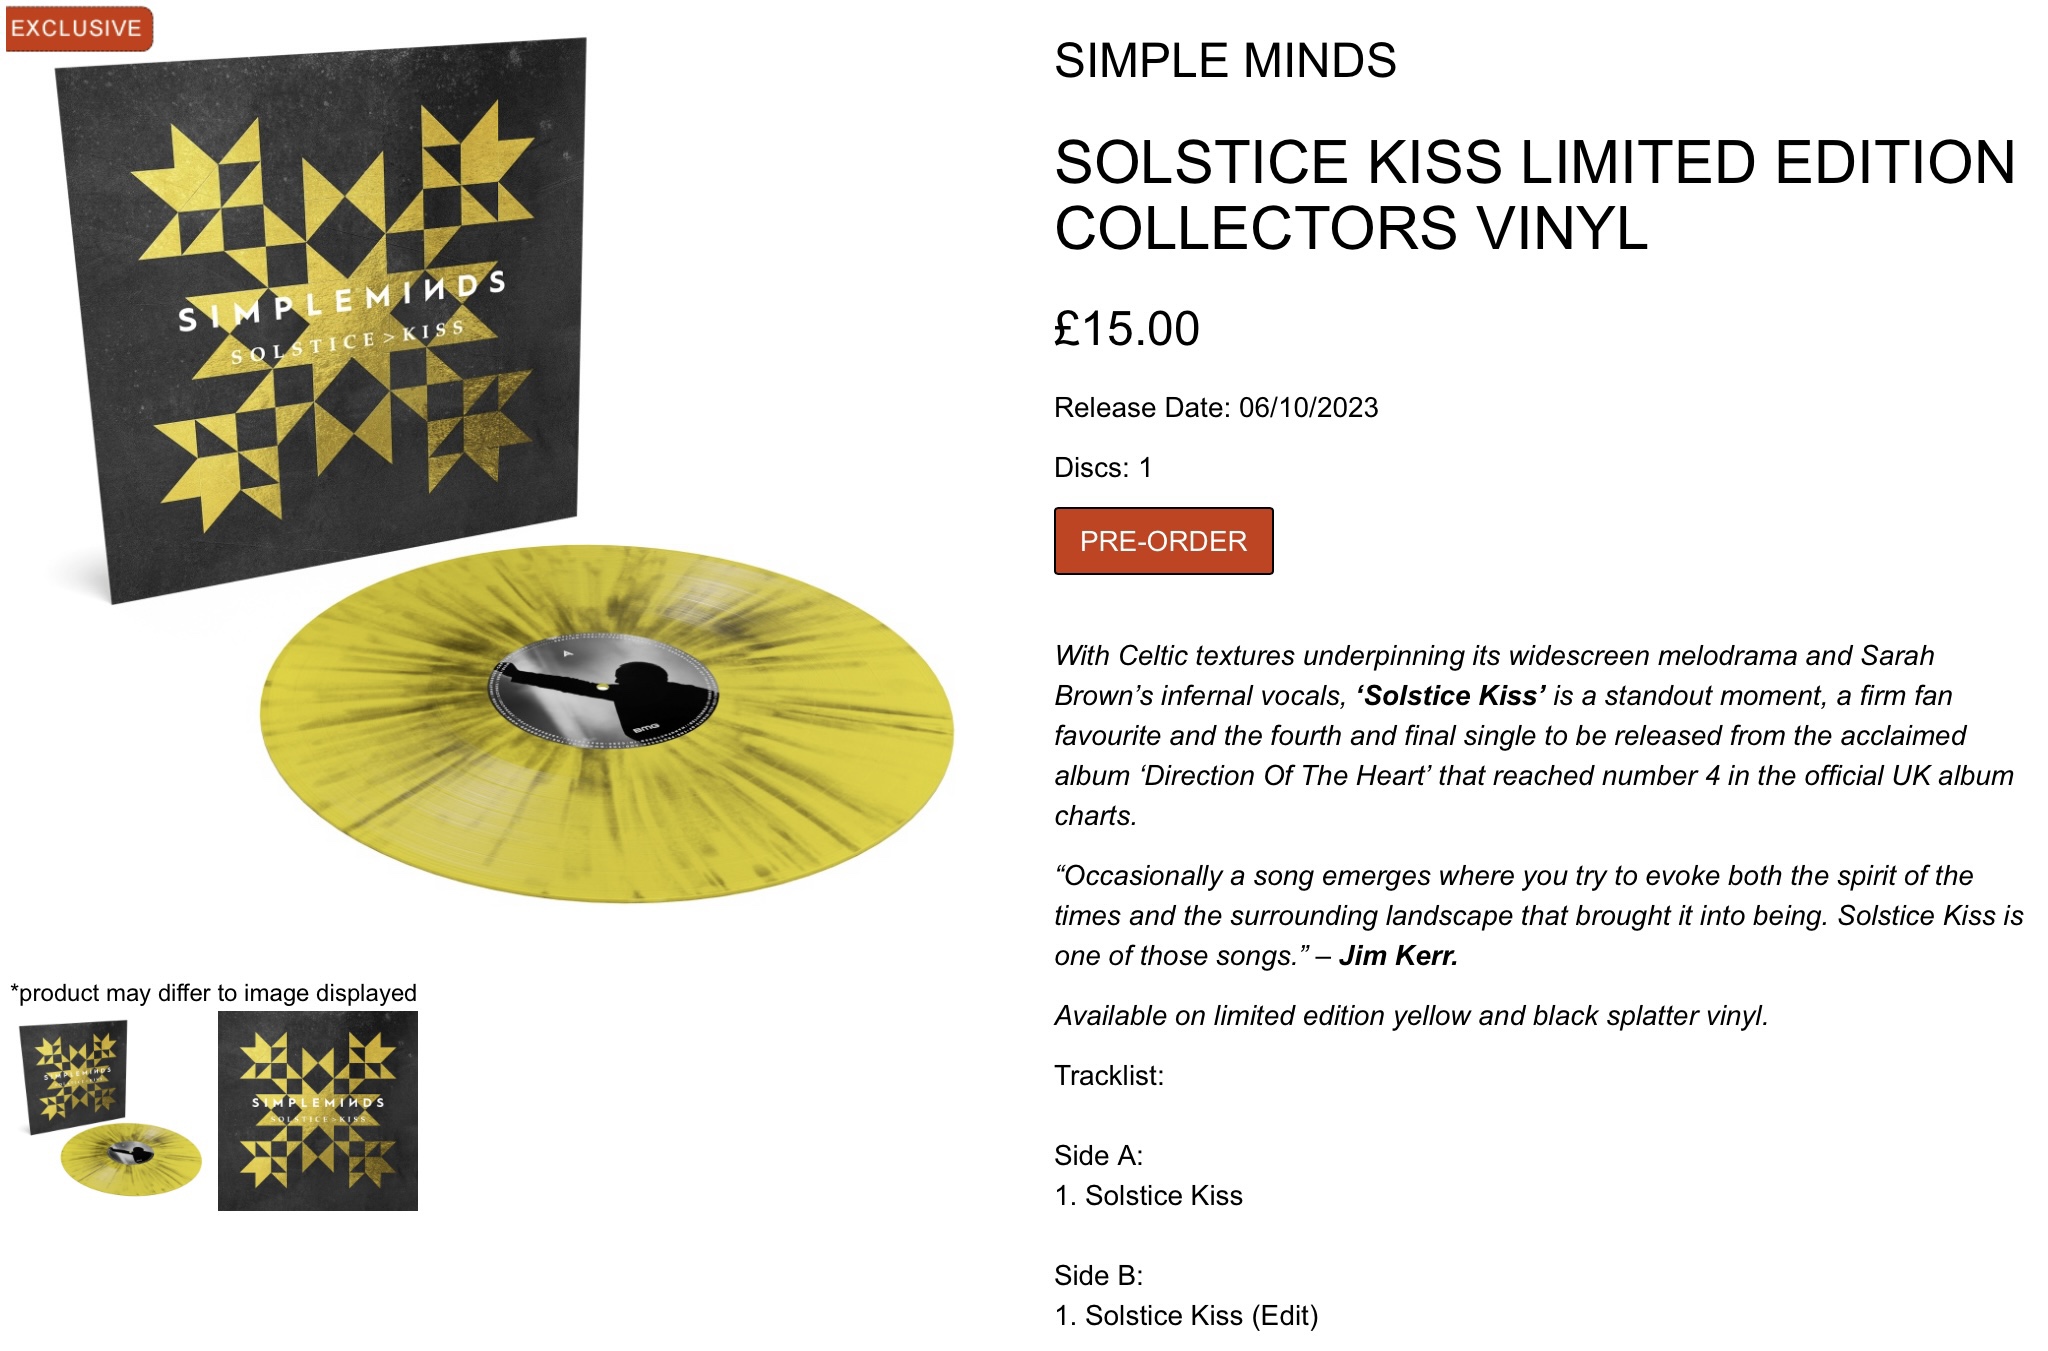 Solstice Kiss 12” Vinyl Single – Available To Pre-order